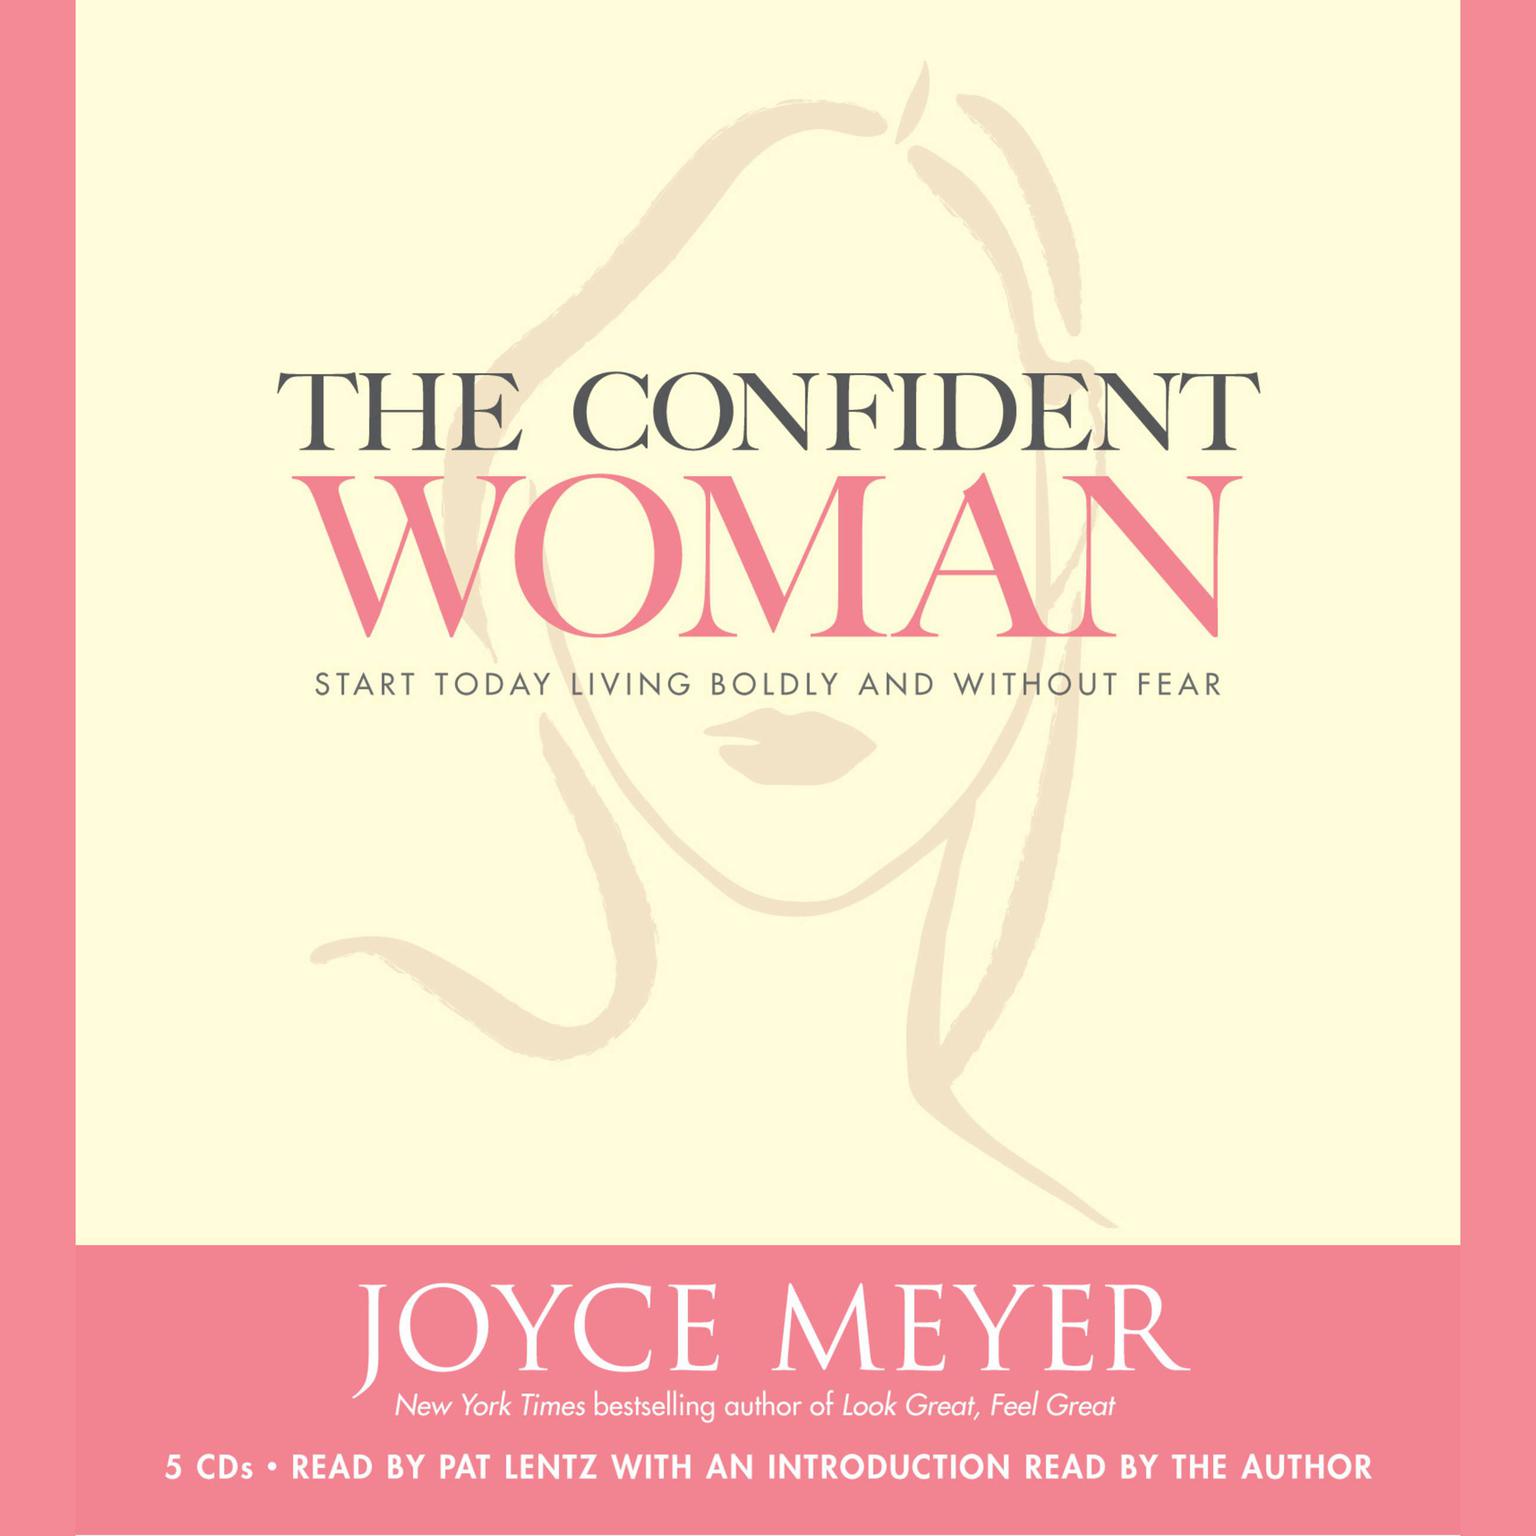 The Confident Woman (Abridged): Start Today Living Boldly and Without Fear Audiobook, by Joyce Meyer